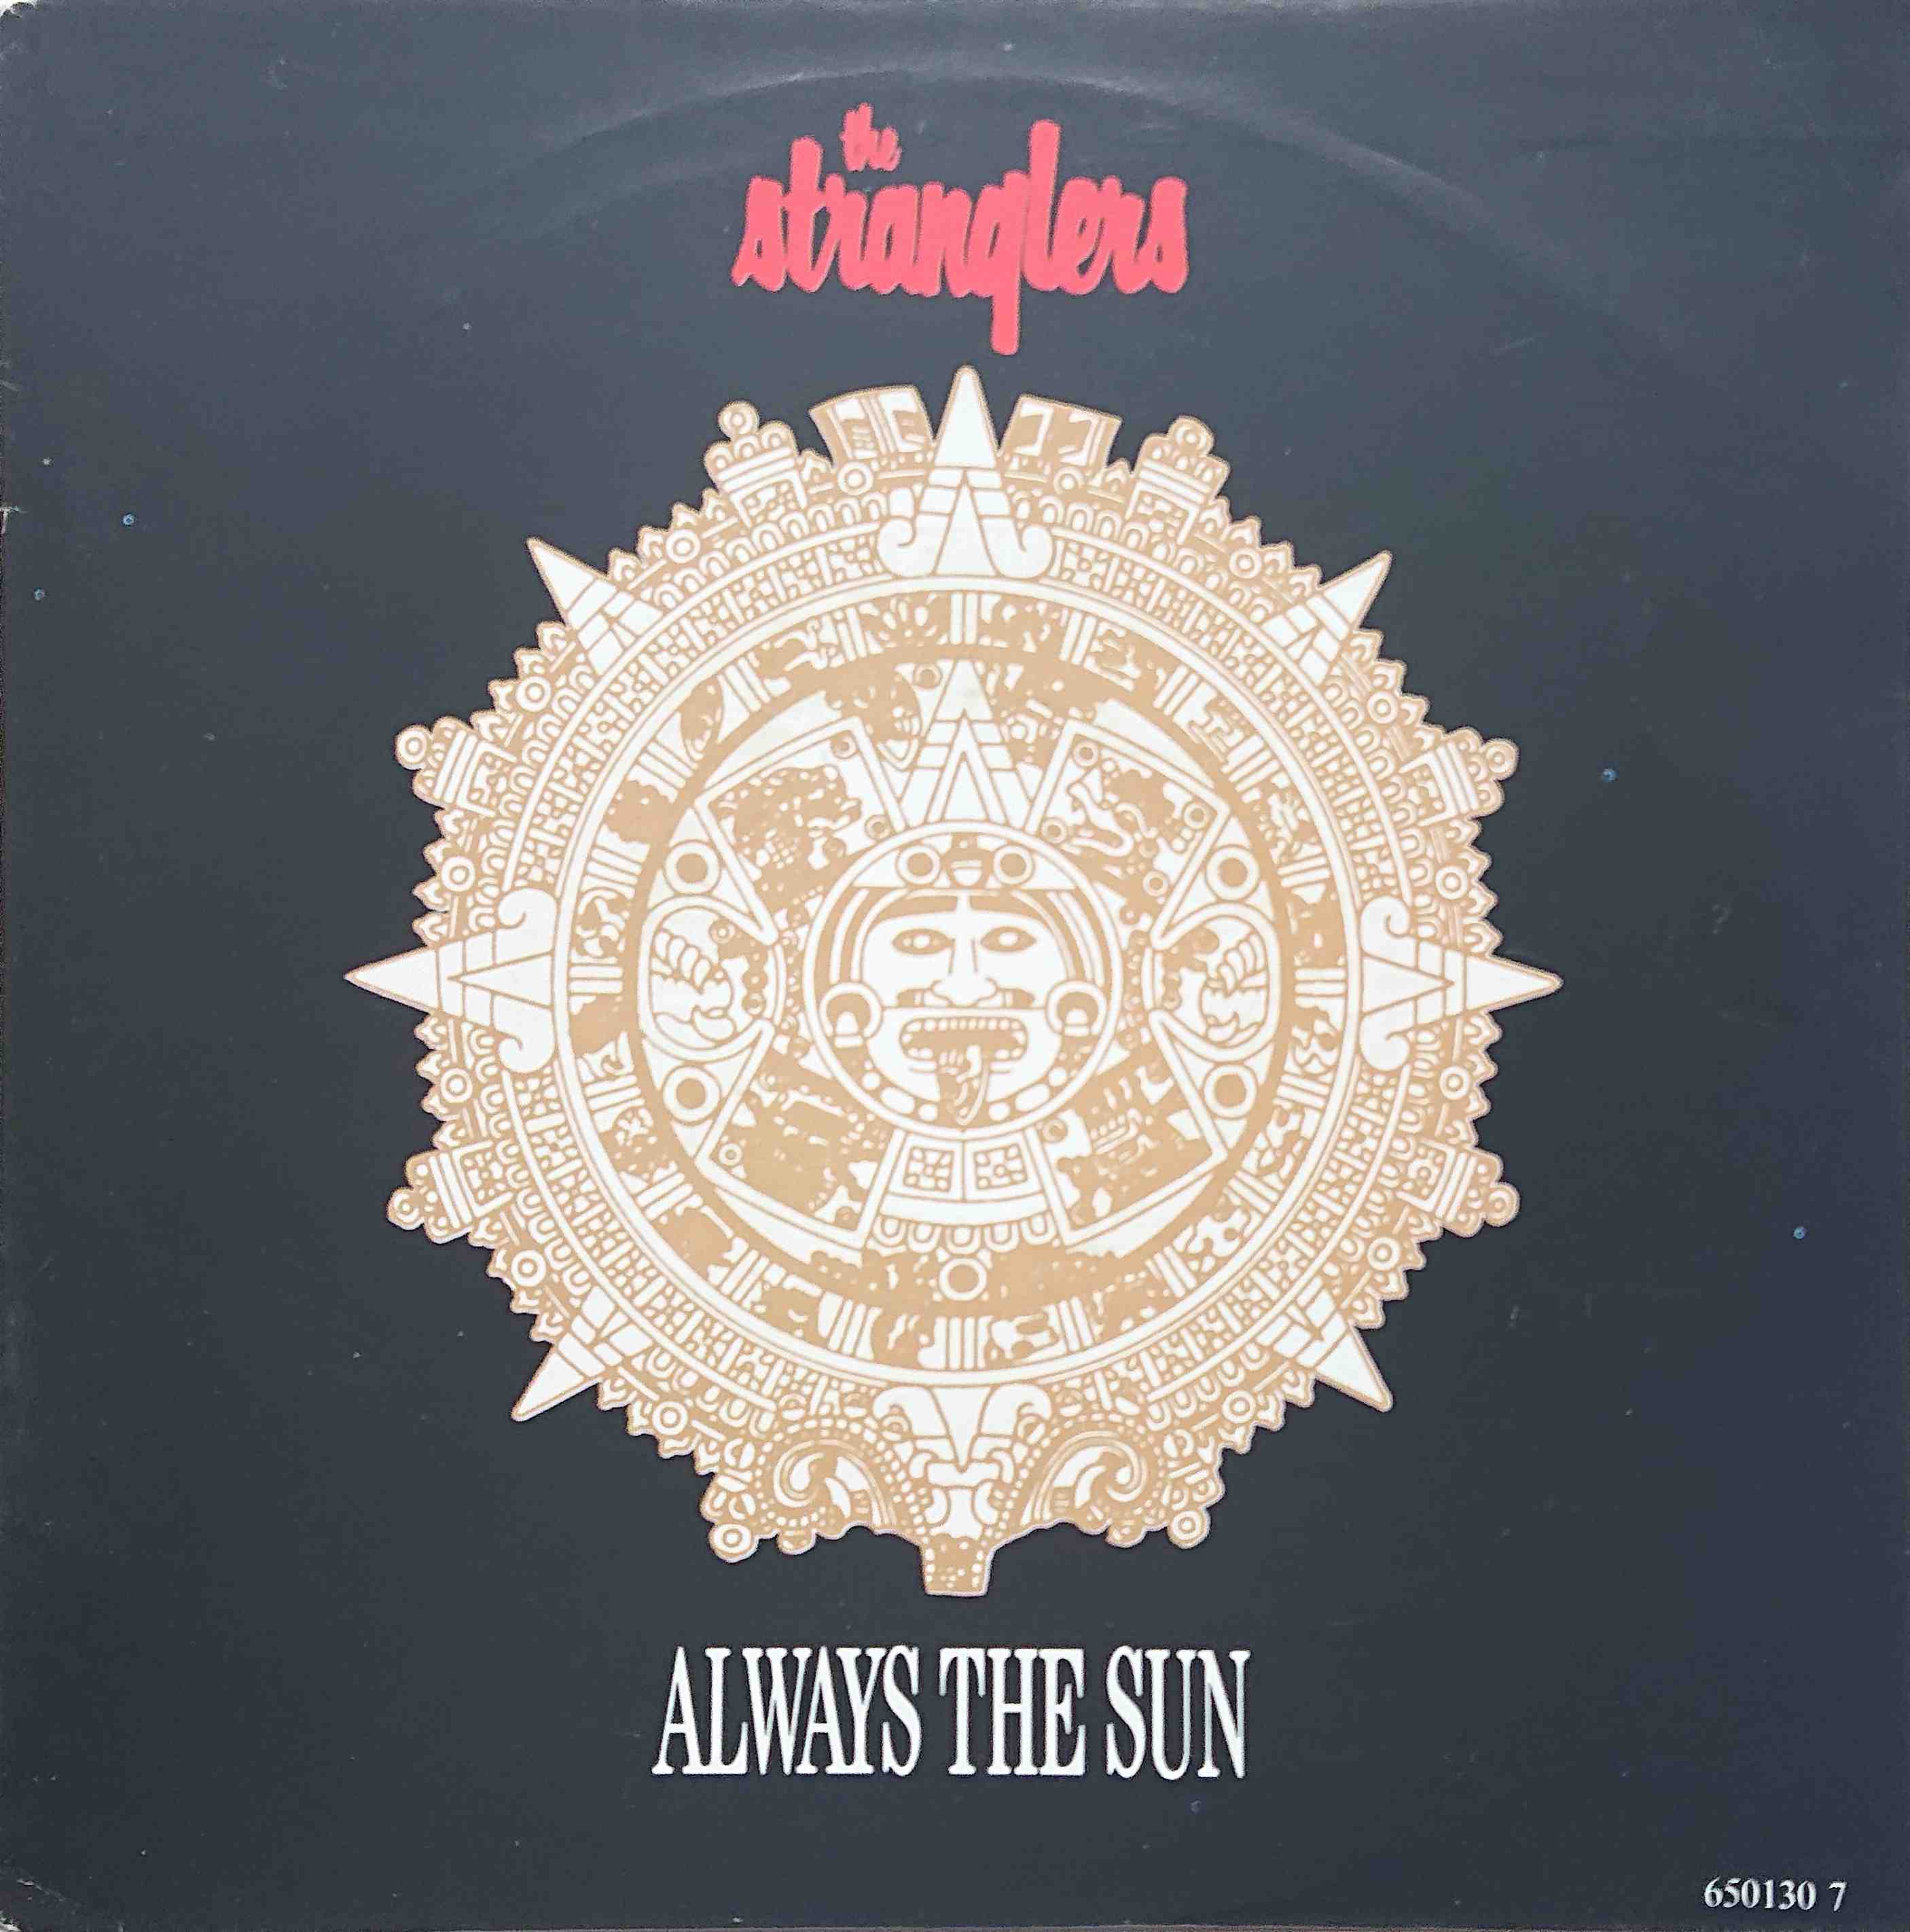 Picture of Always the Sun by artist The Stranglers from The Stranglers singles